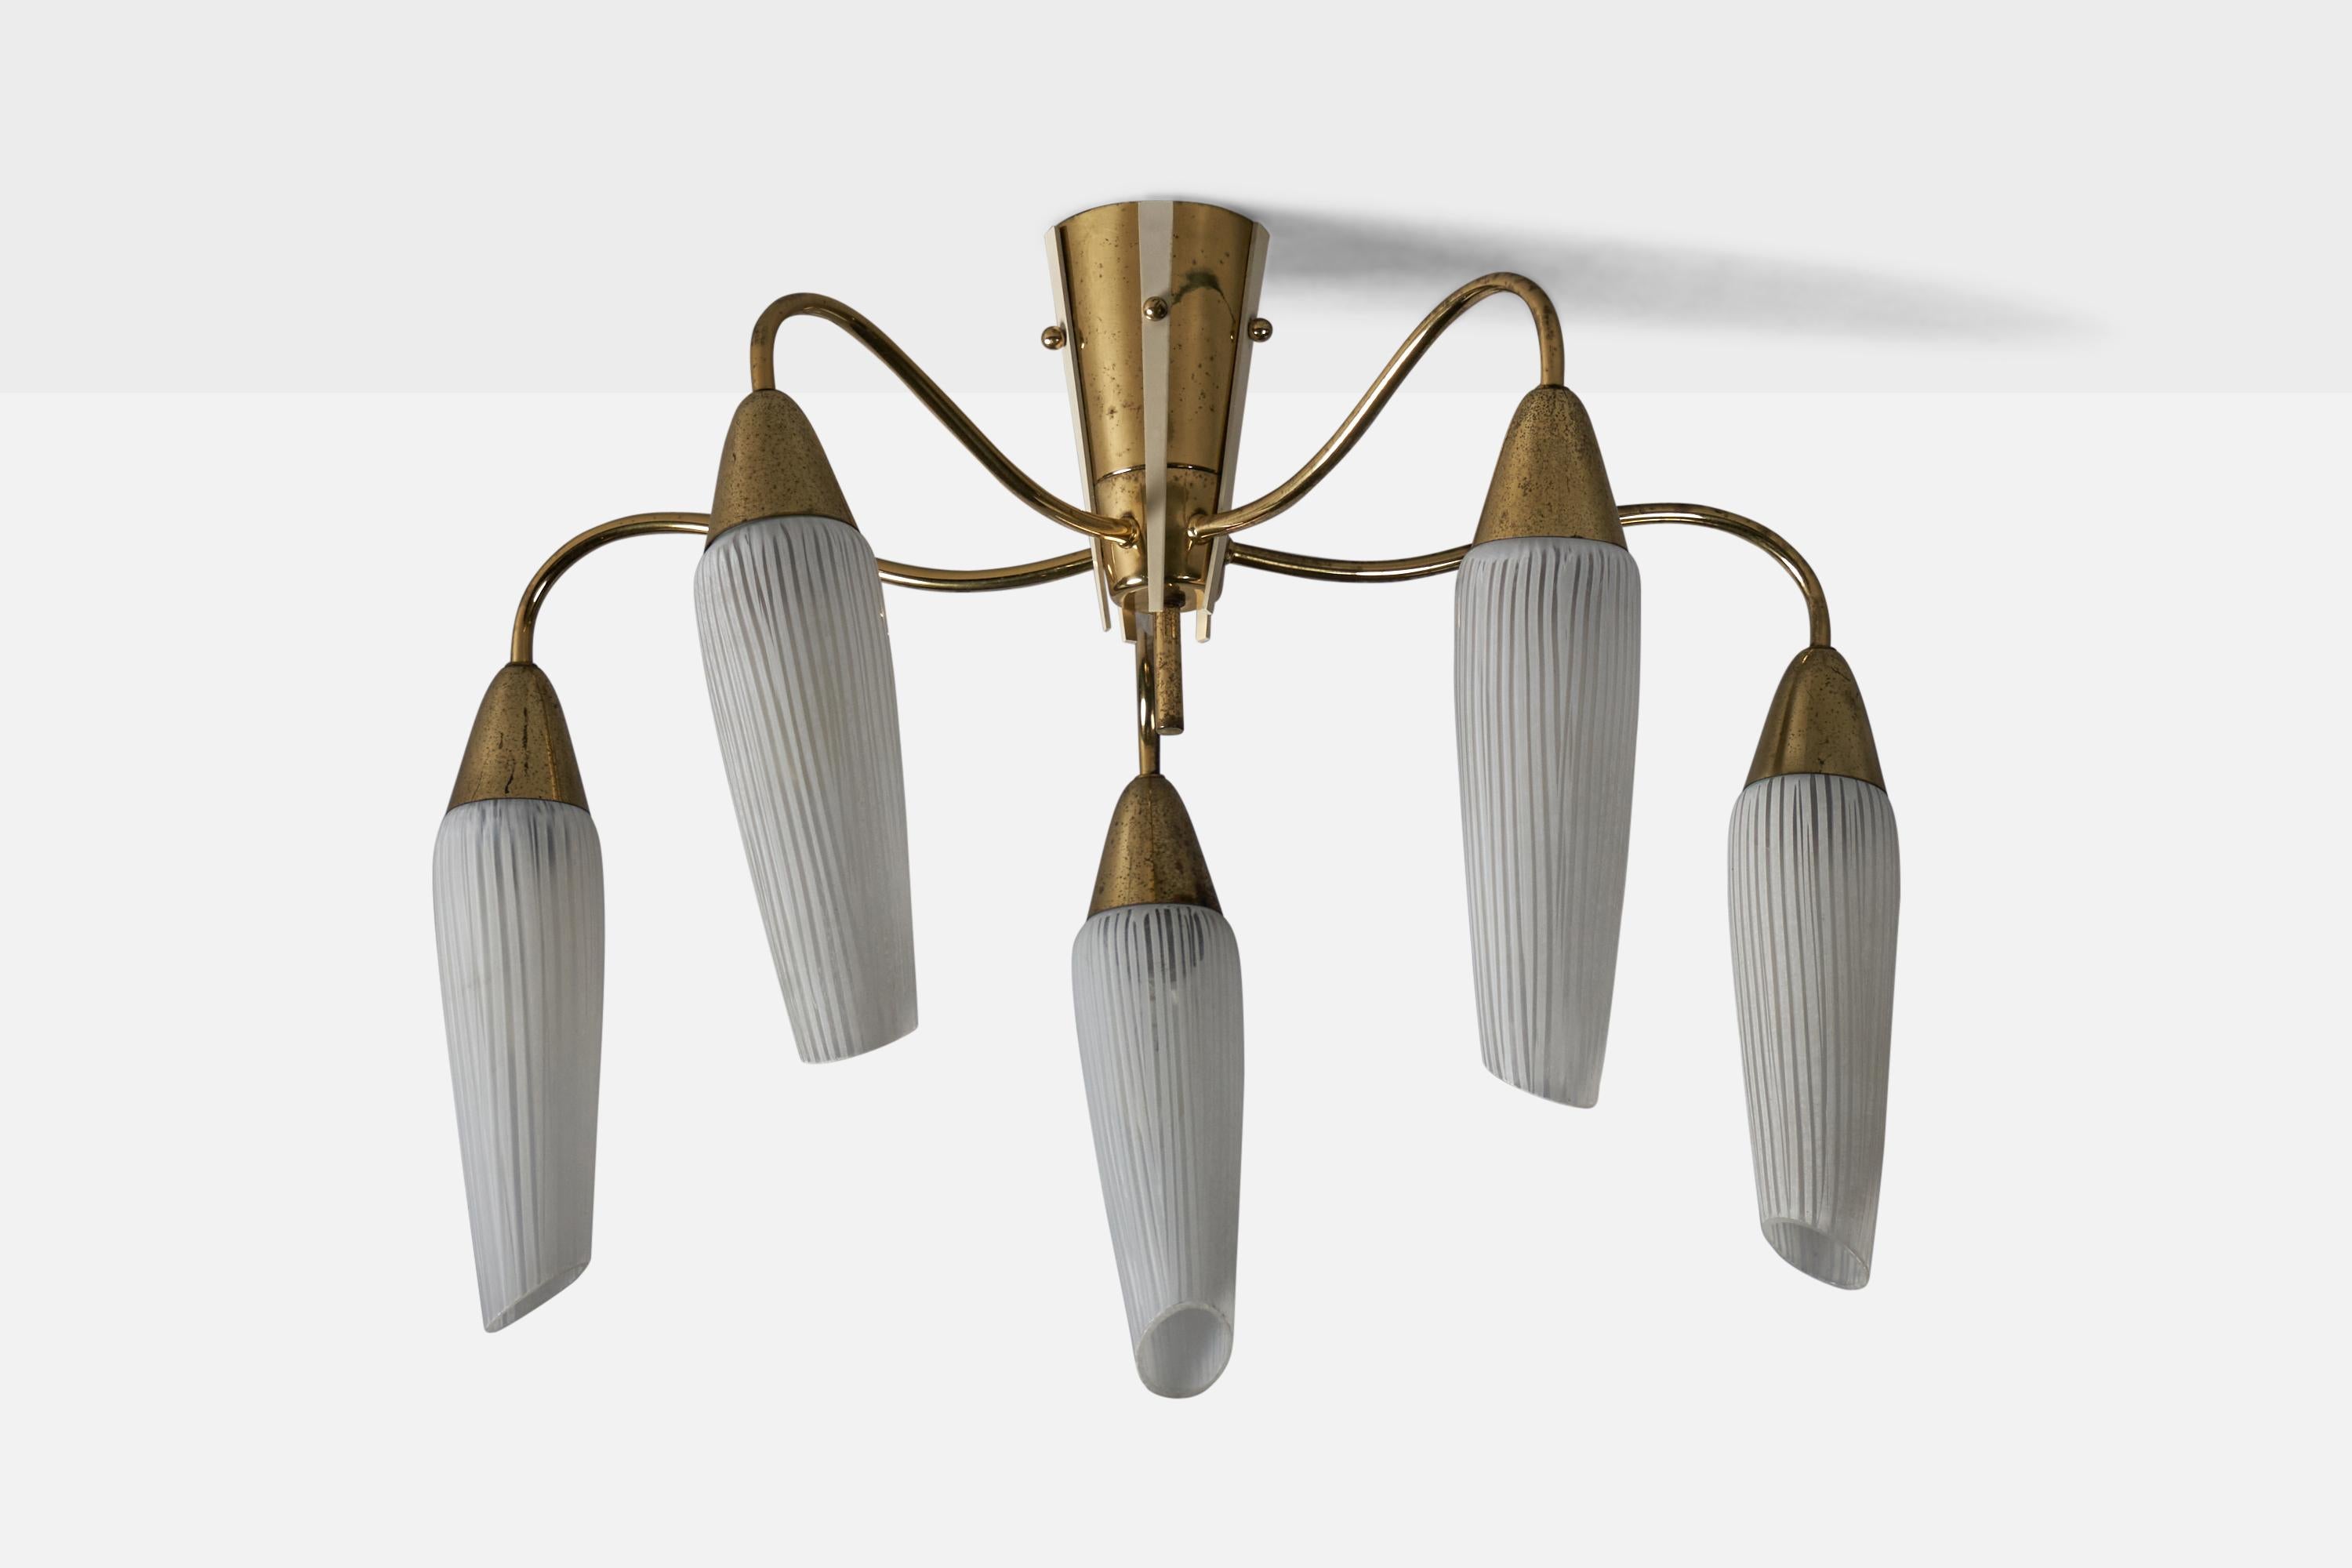 A five-armed brass and glass chandelier, designed and produced in Sweden, 1950s.

Overall Dimensions (inches): 15